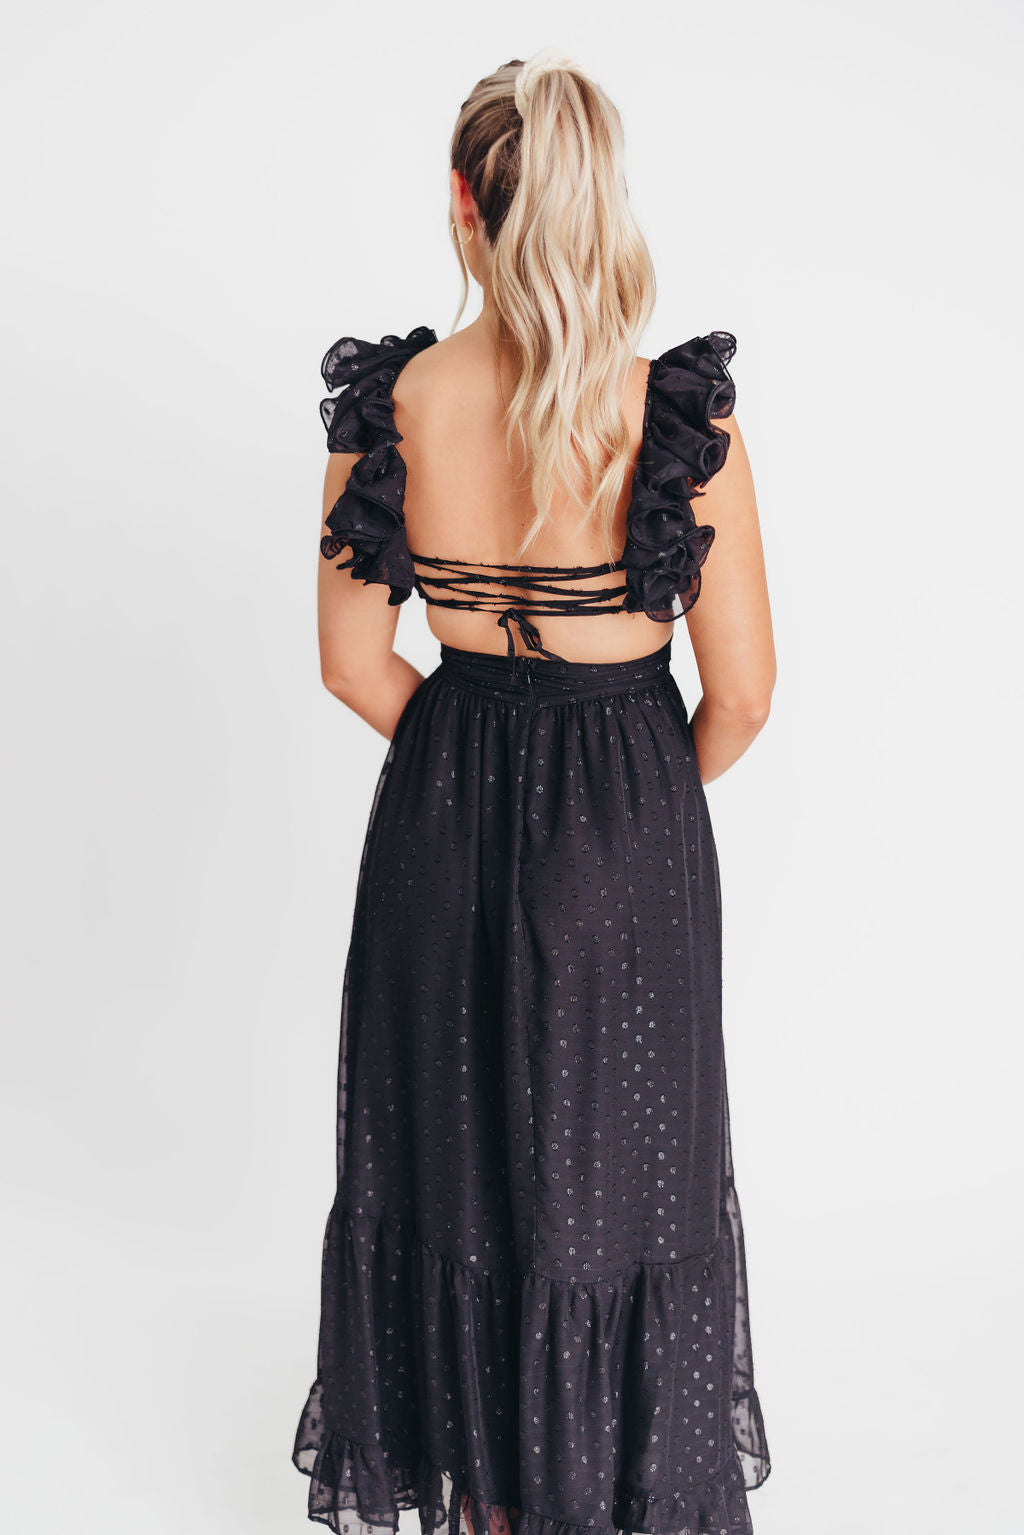 Ingrid Embroidered Maxi Dress in Black Dots